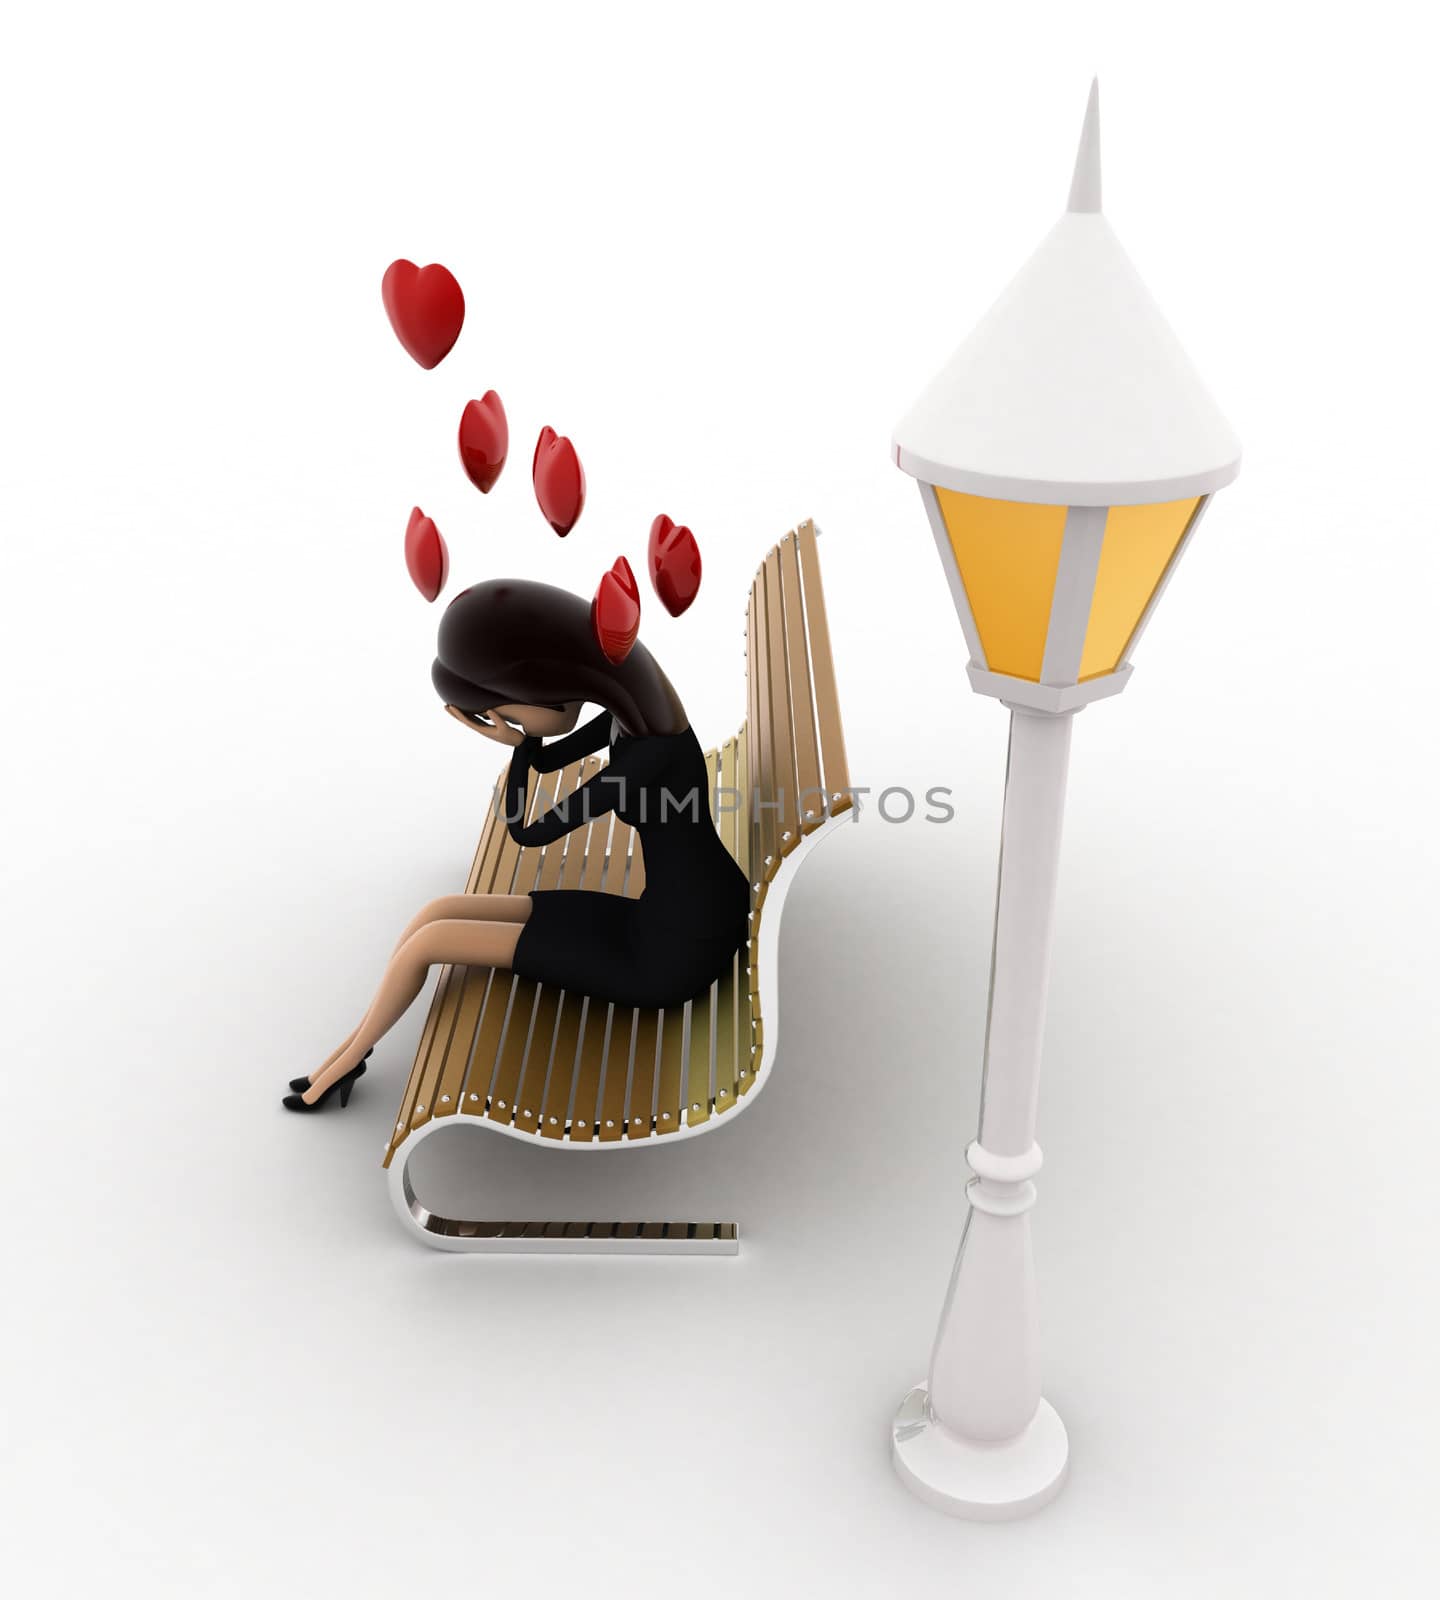 3d woman sitting on batch and in love with hearts flying concept by touchmenithin@gmail.com